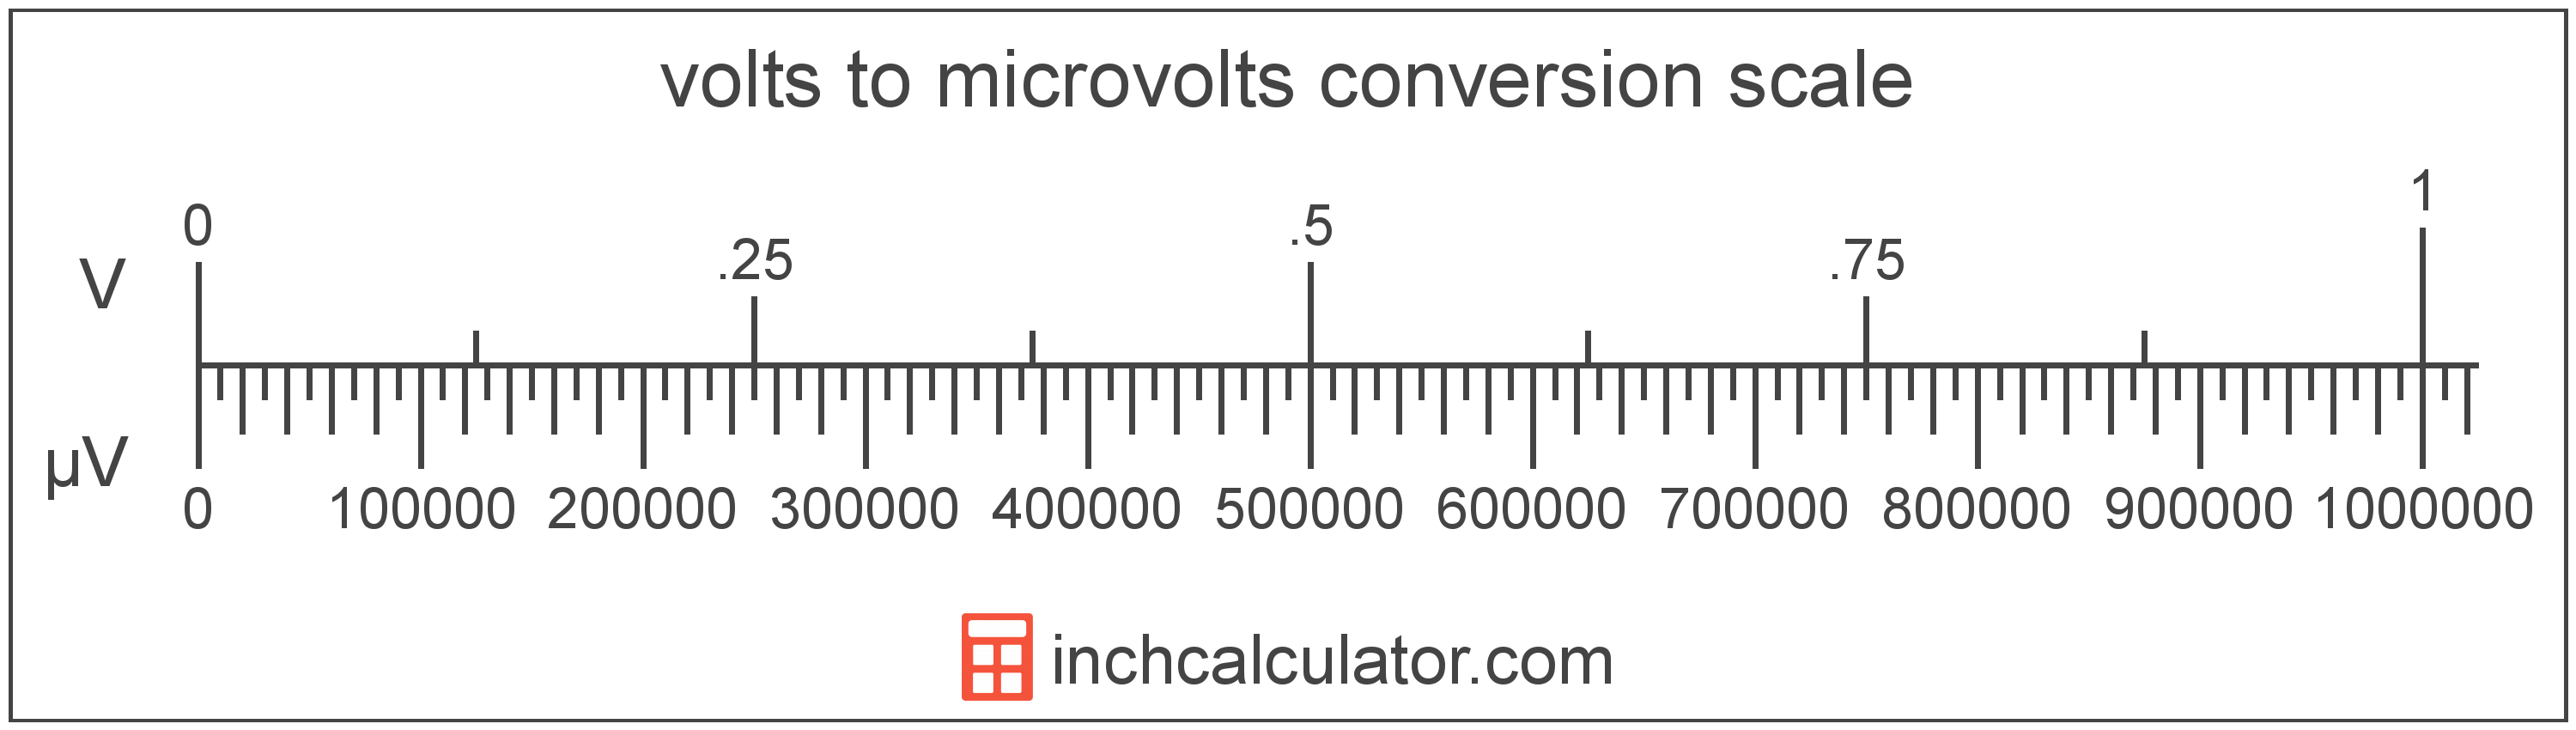 conversion scale showing microvolts and equivalent volts voltage values